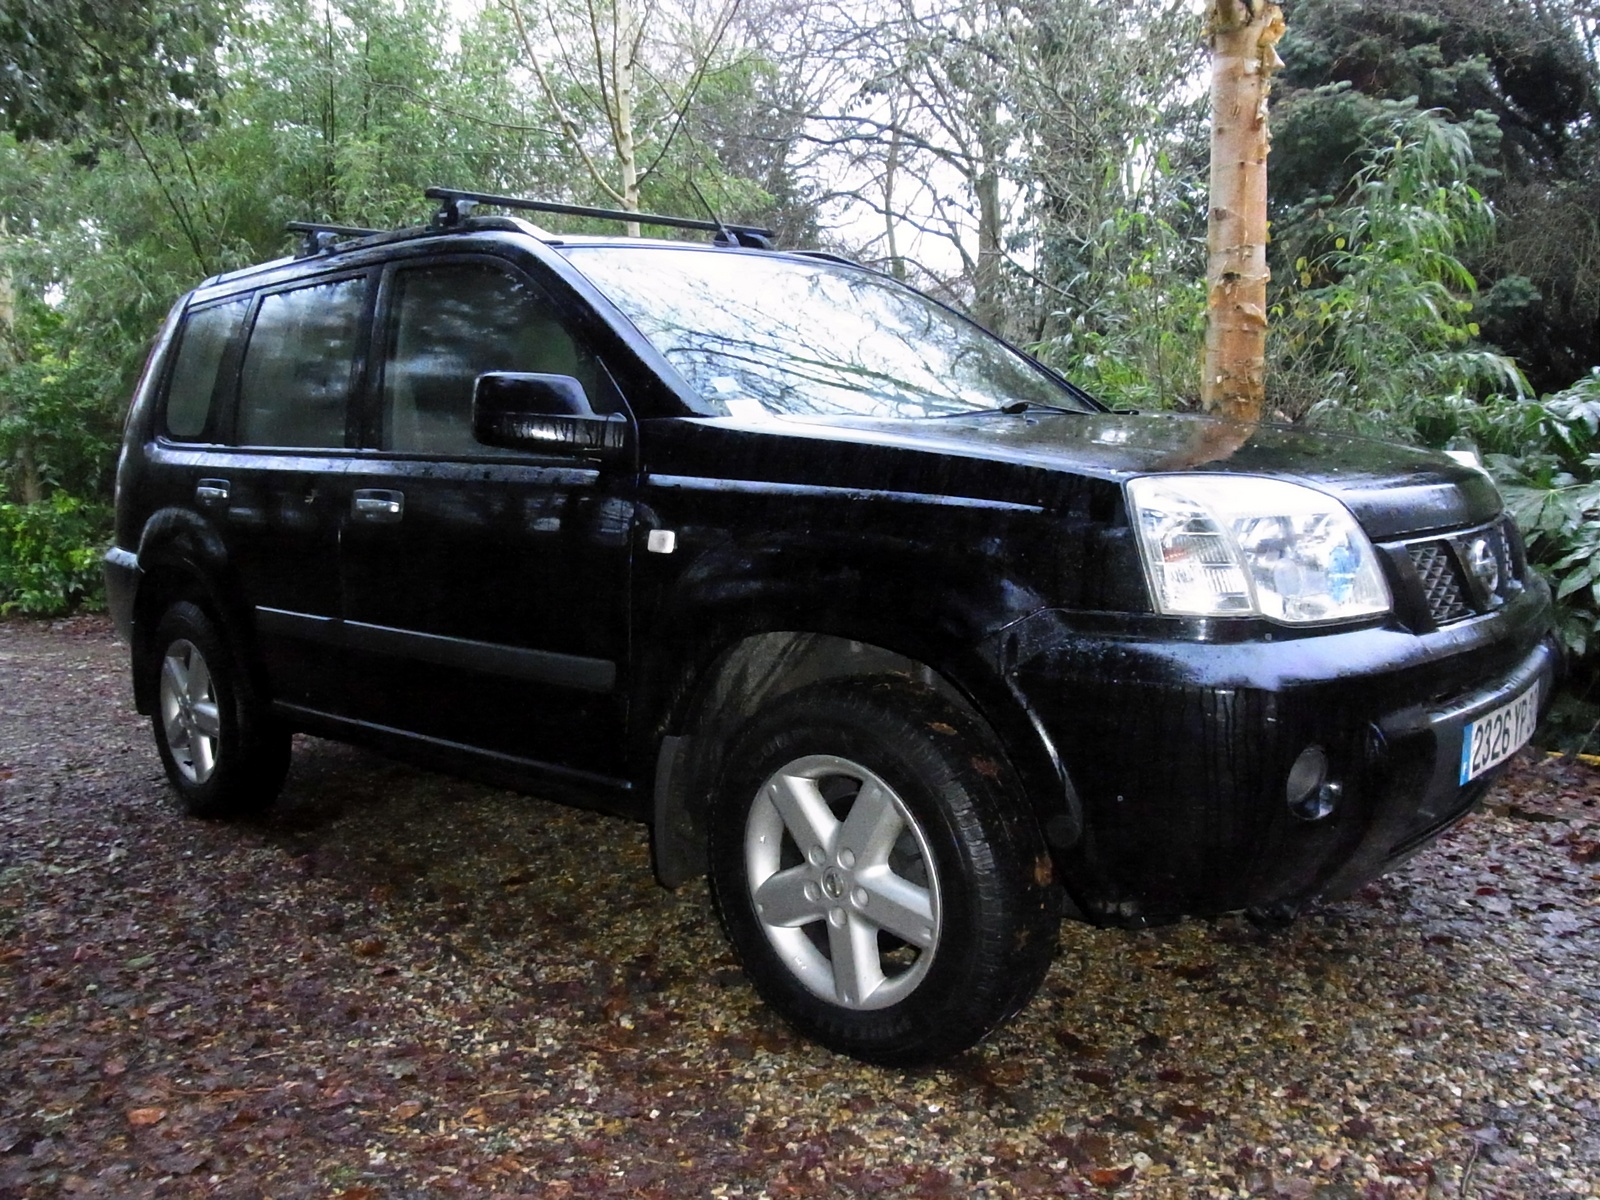 Nissan x trail 2004 picture #5